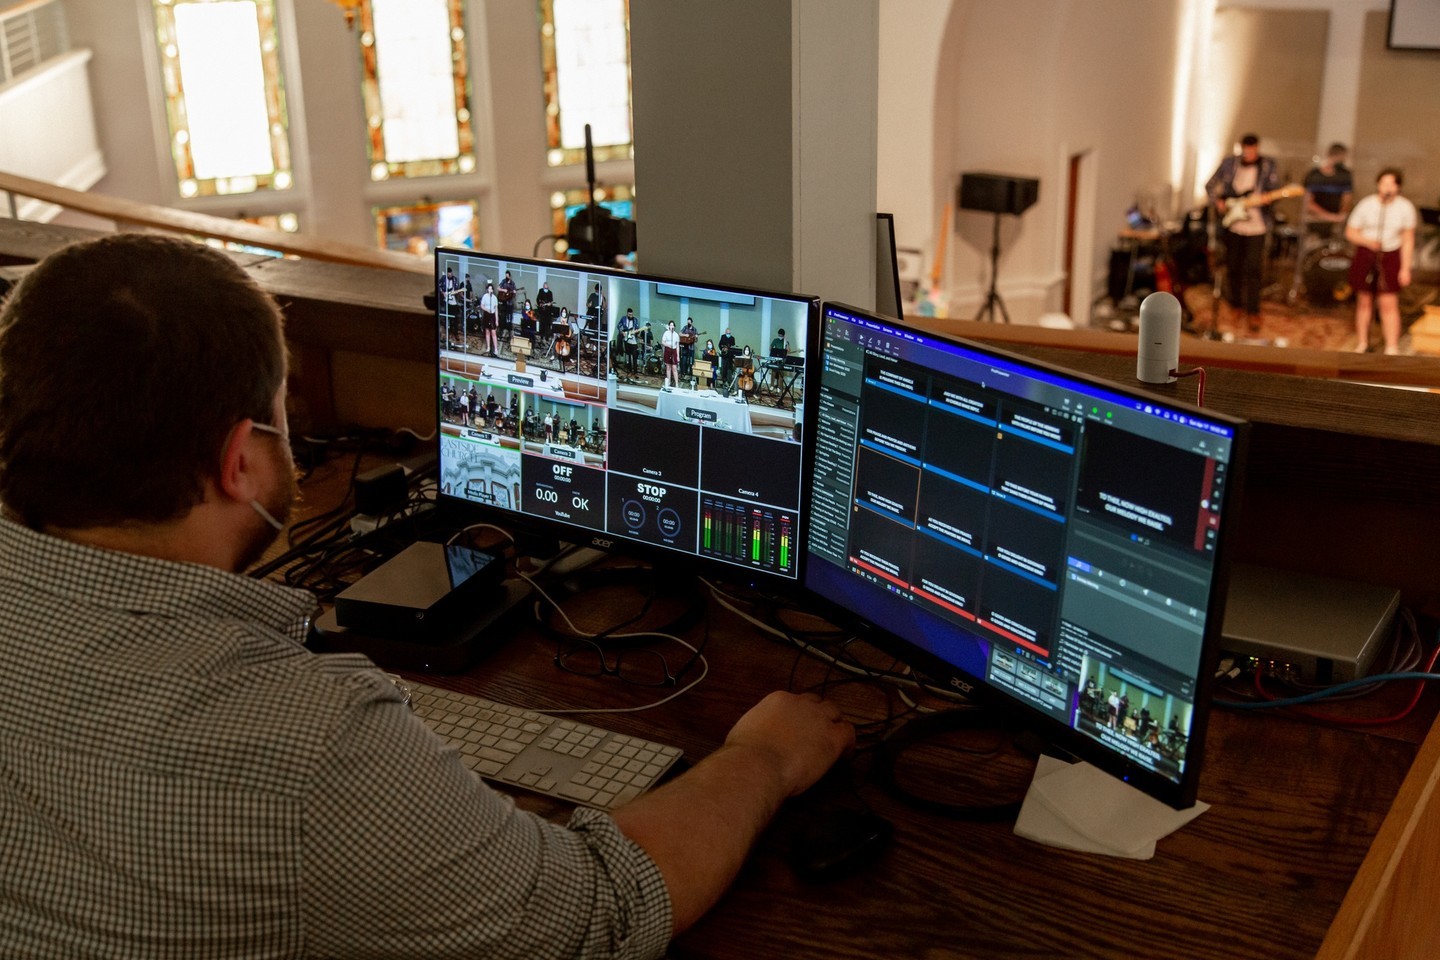 Do you have some tech or livestream experience? Do you not but have a healthy curiosity that you want to channel into church ministry? On this #Thursdayserveday we're highlighting the tech booth! Help with livestream, ProPresenter or sound. Connect with Troi at Troi@eastsideatl.org for more information.